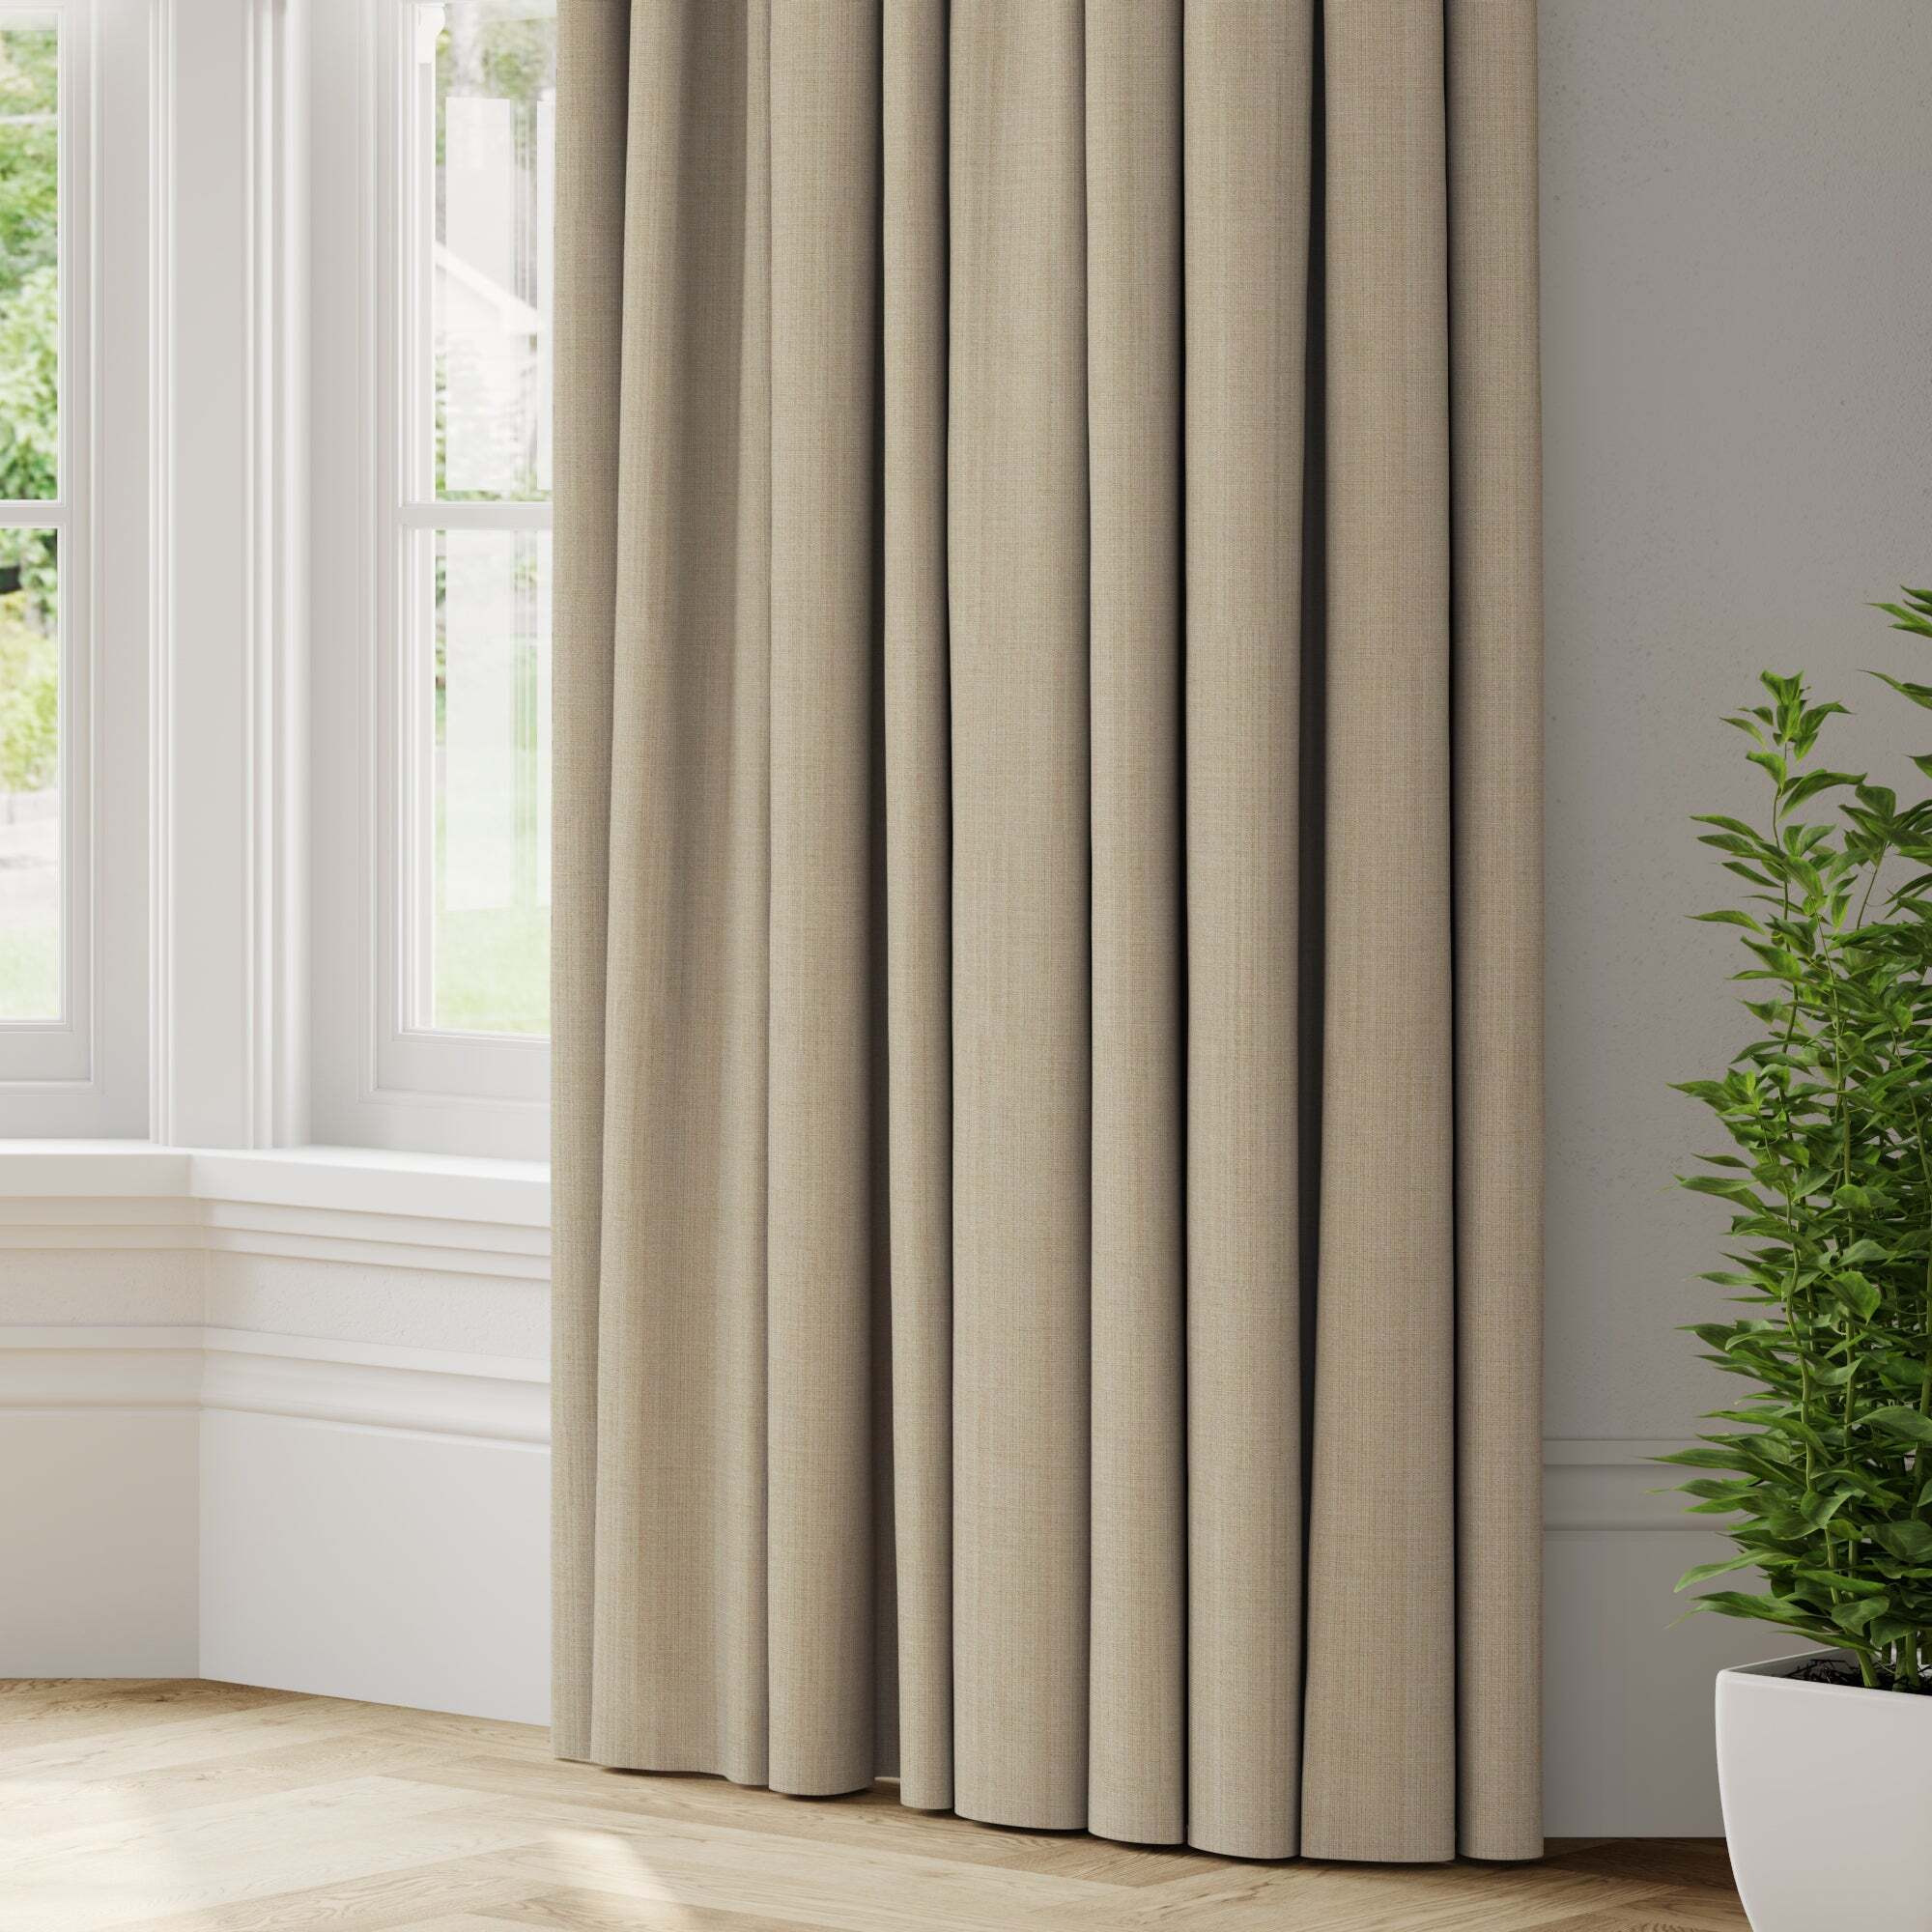 Bowness Made to Measure Curtains natural